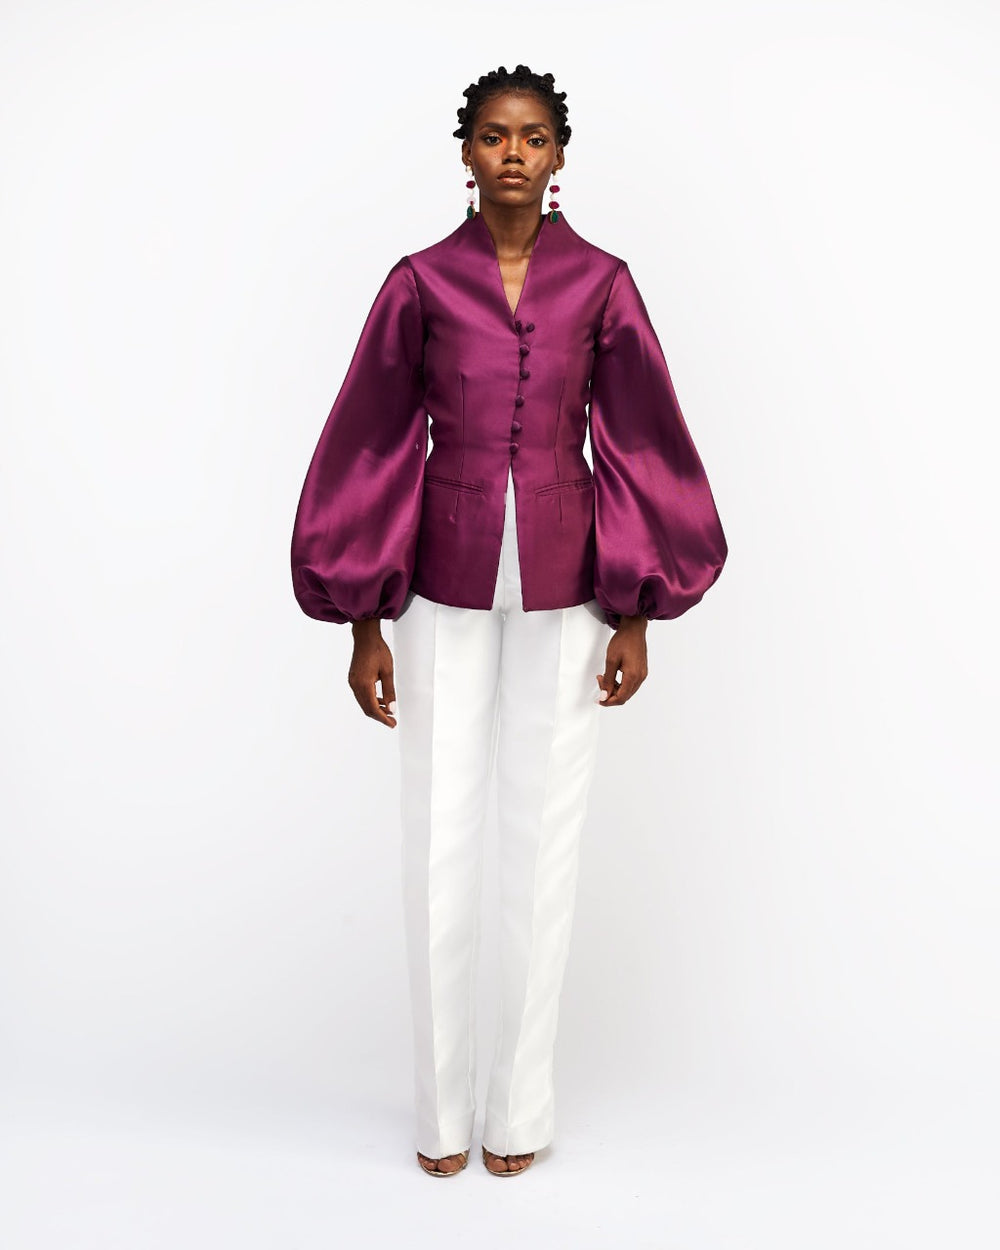 A model wearing aubergine colored silk satin jacket with white pants